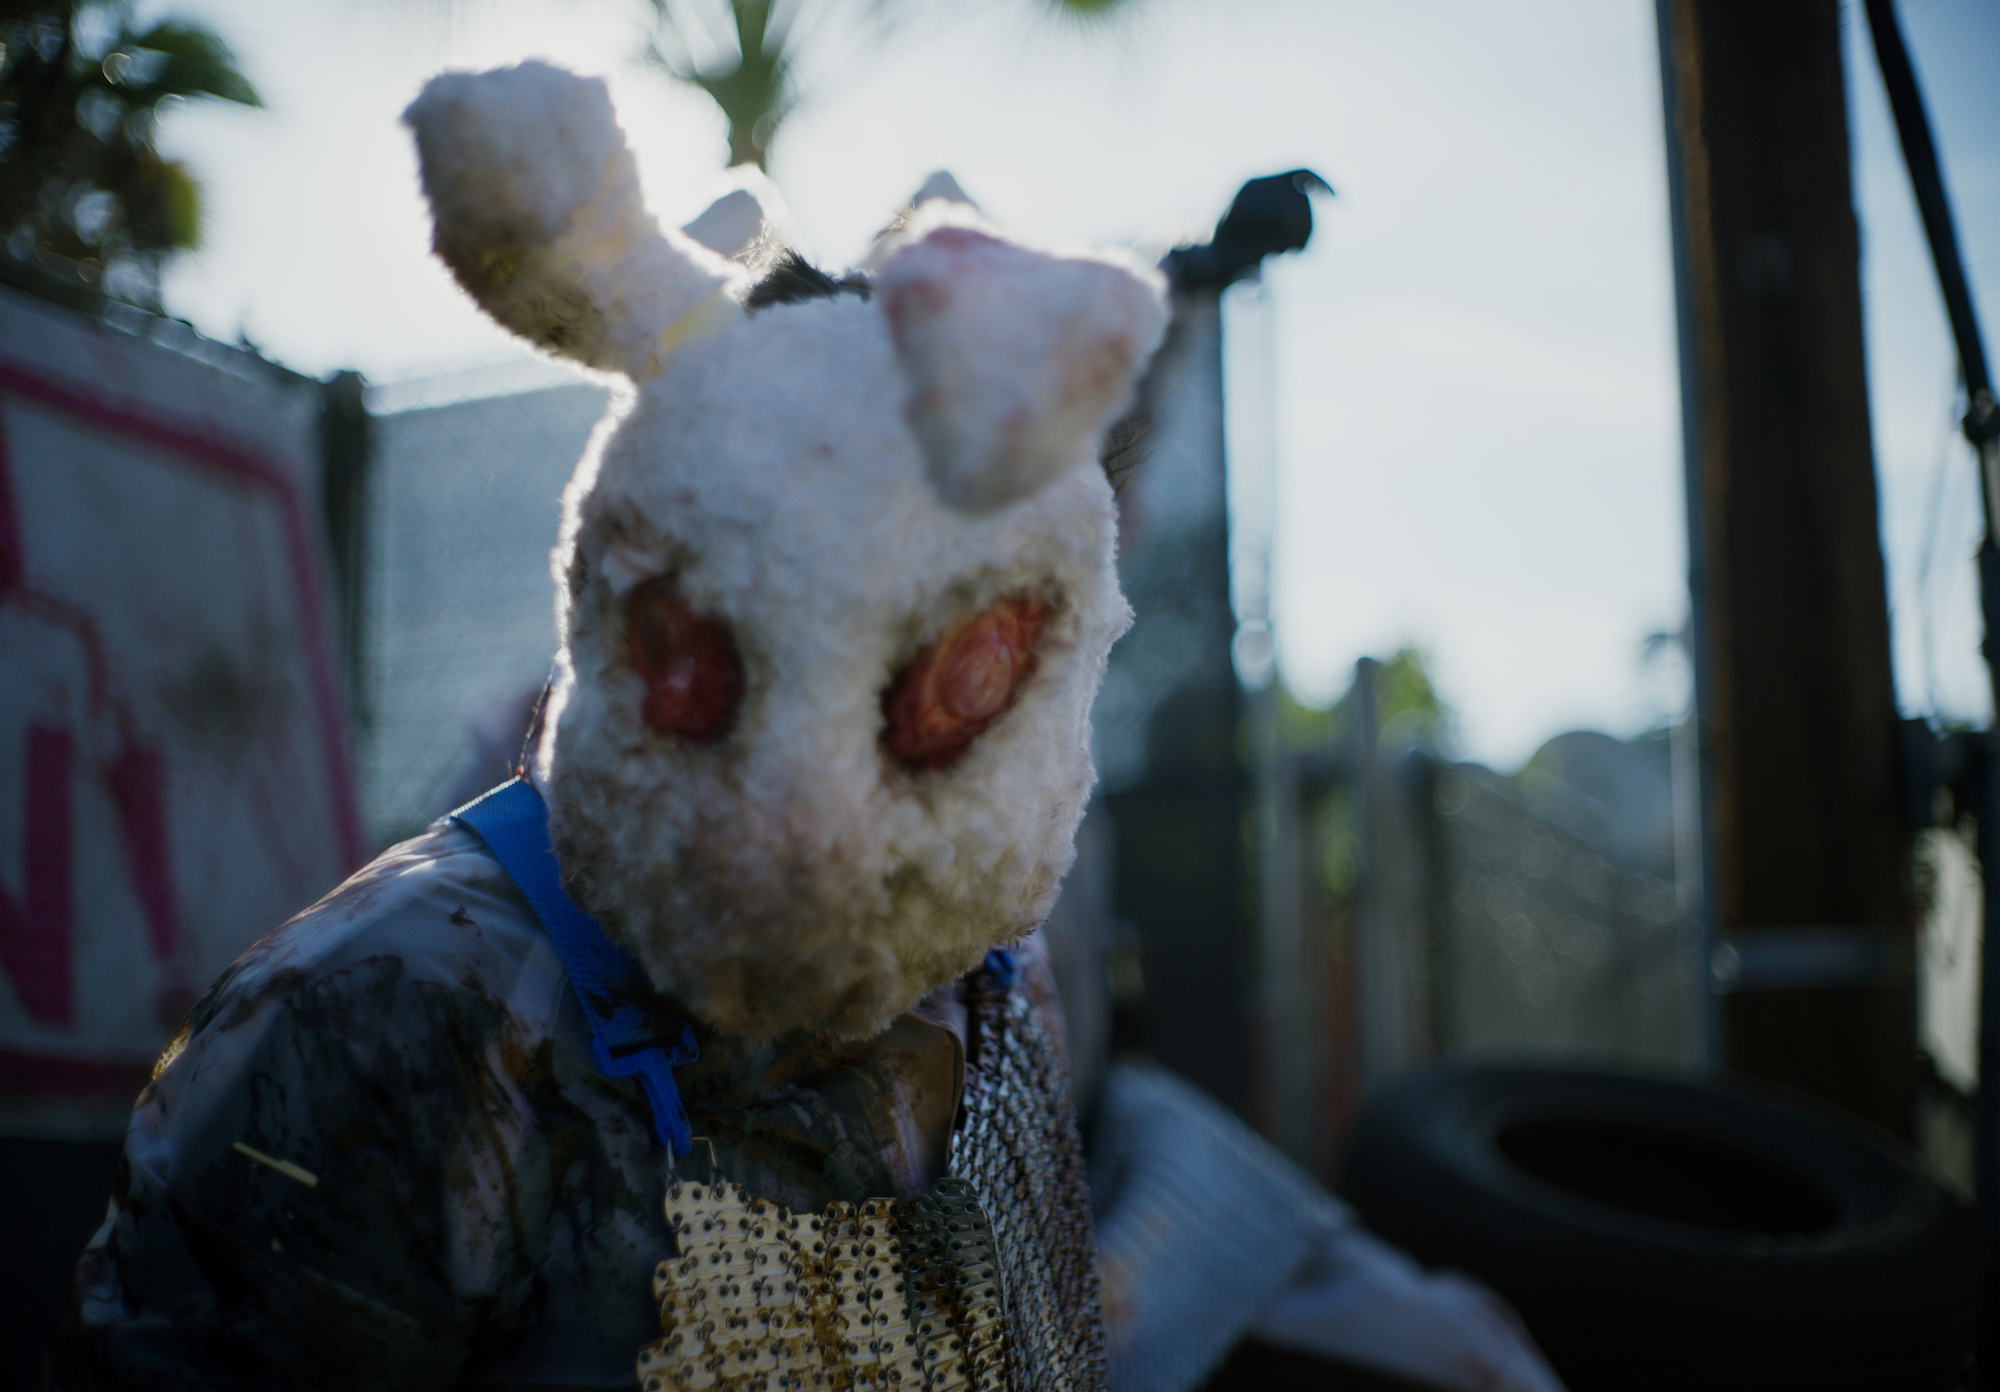 The Forever Purge bunny mask